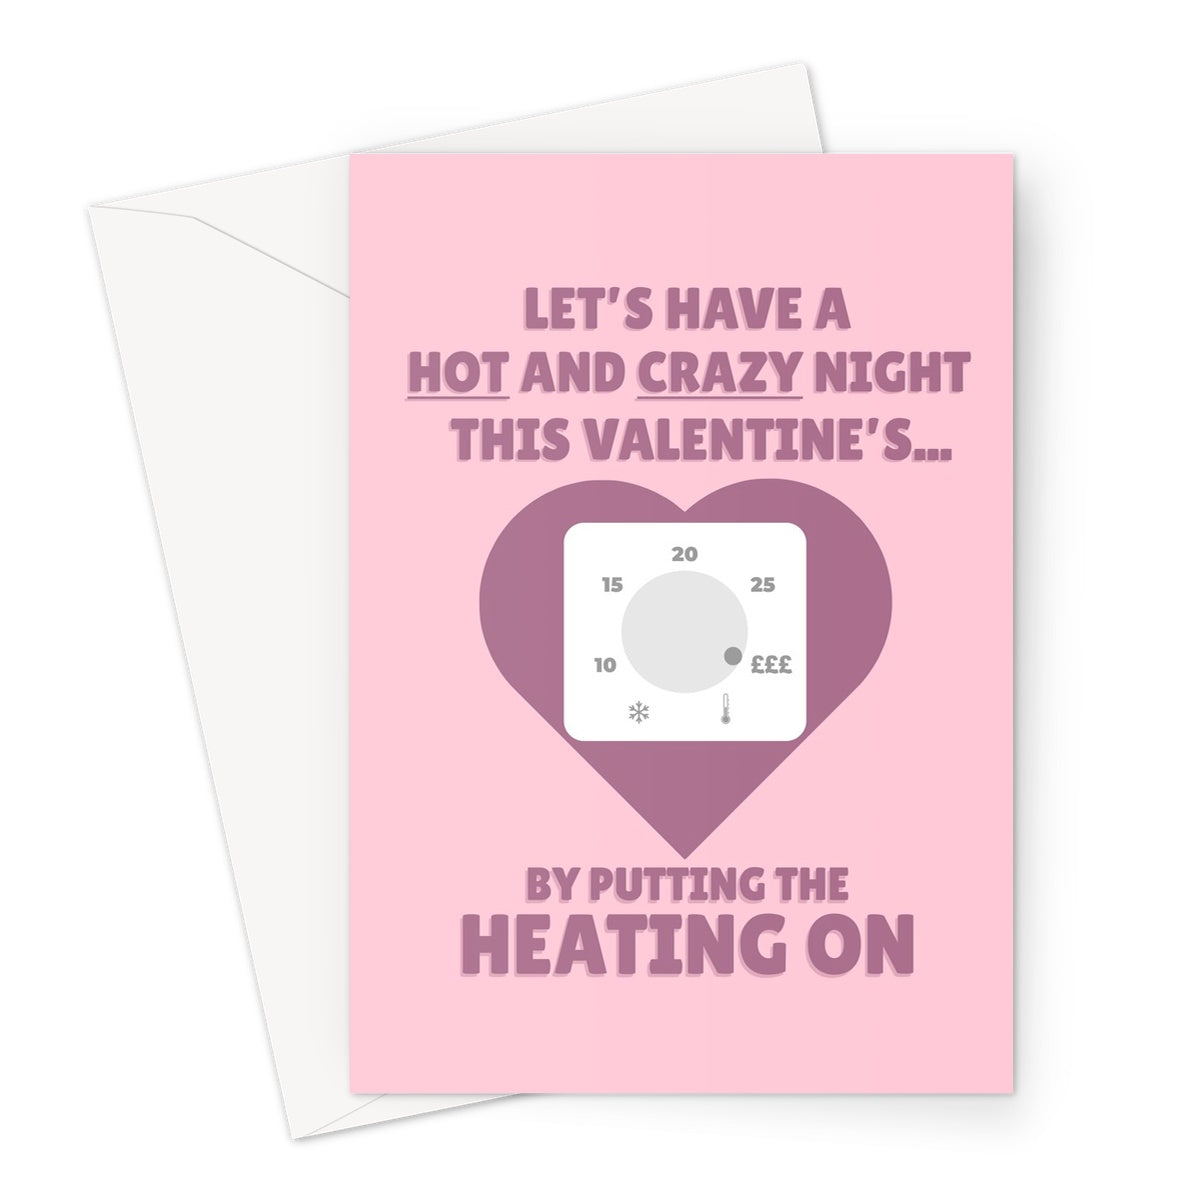 Let's Have a Hot and Crazy Night This Valentine's... By Putting The Heating On Funny Love Cost of Living Expensive Cheeky Greeting Card